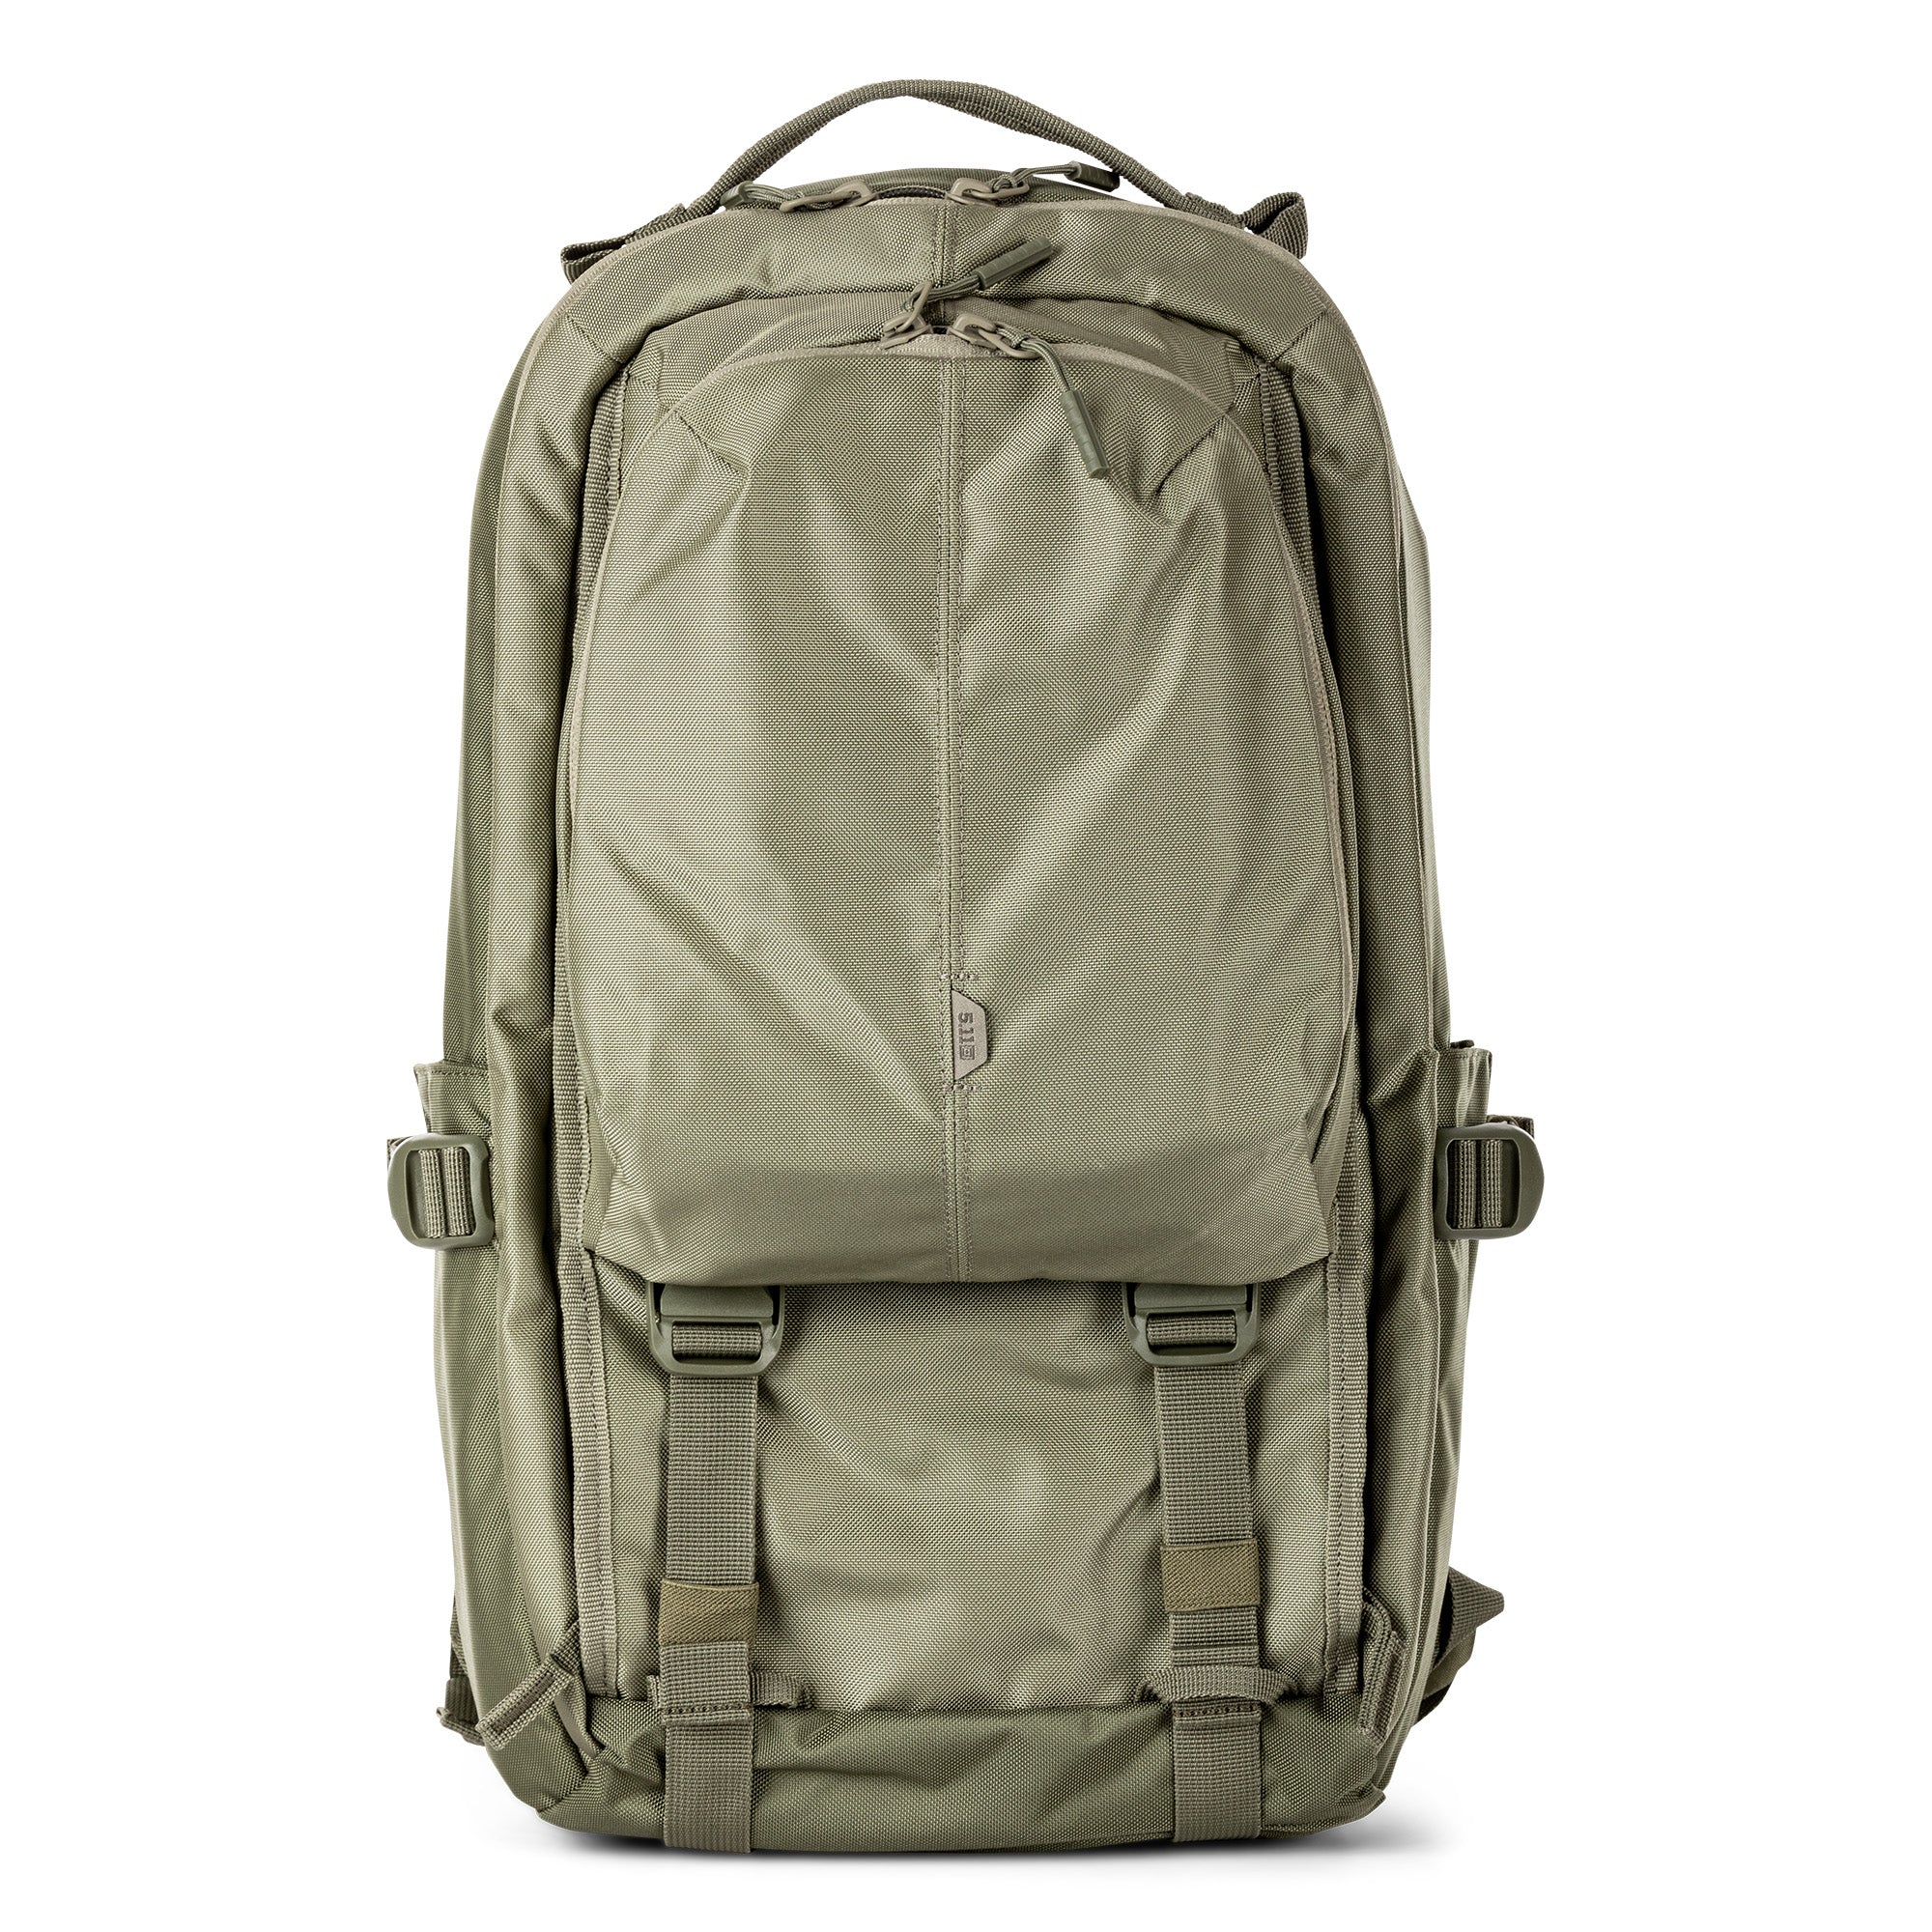 5.11 Tactical LV18 Backpack 2.0 30L Bags, Packs and Cases 5.11 Tactical Phyton Tactical Gear Supplier Tactical Distributors Australia